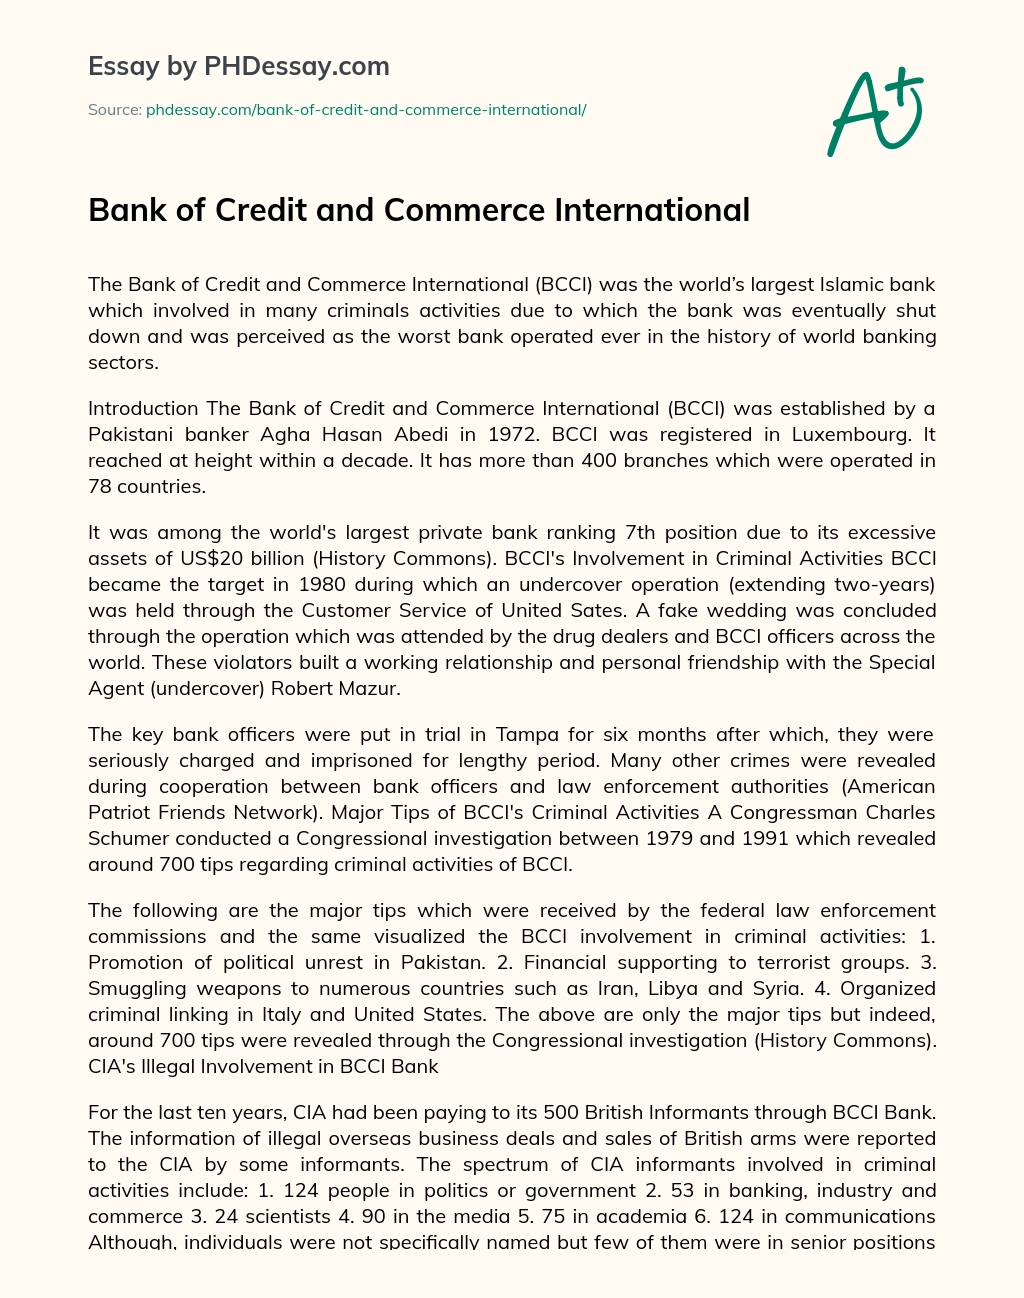 Bank of Credit and Commerce International essay